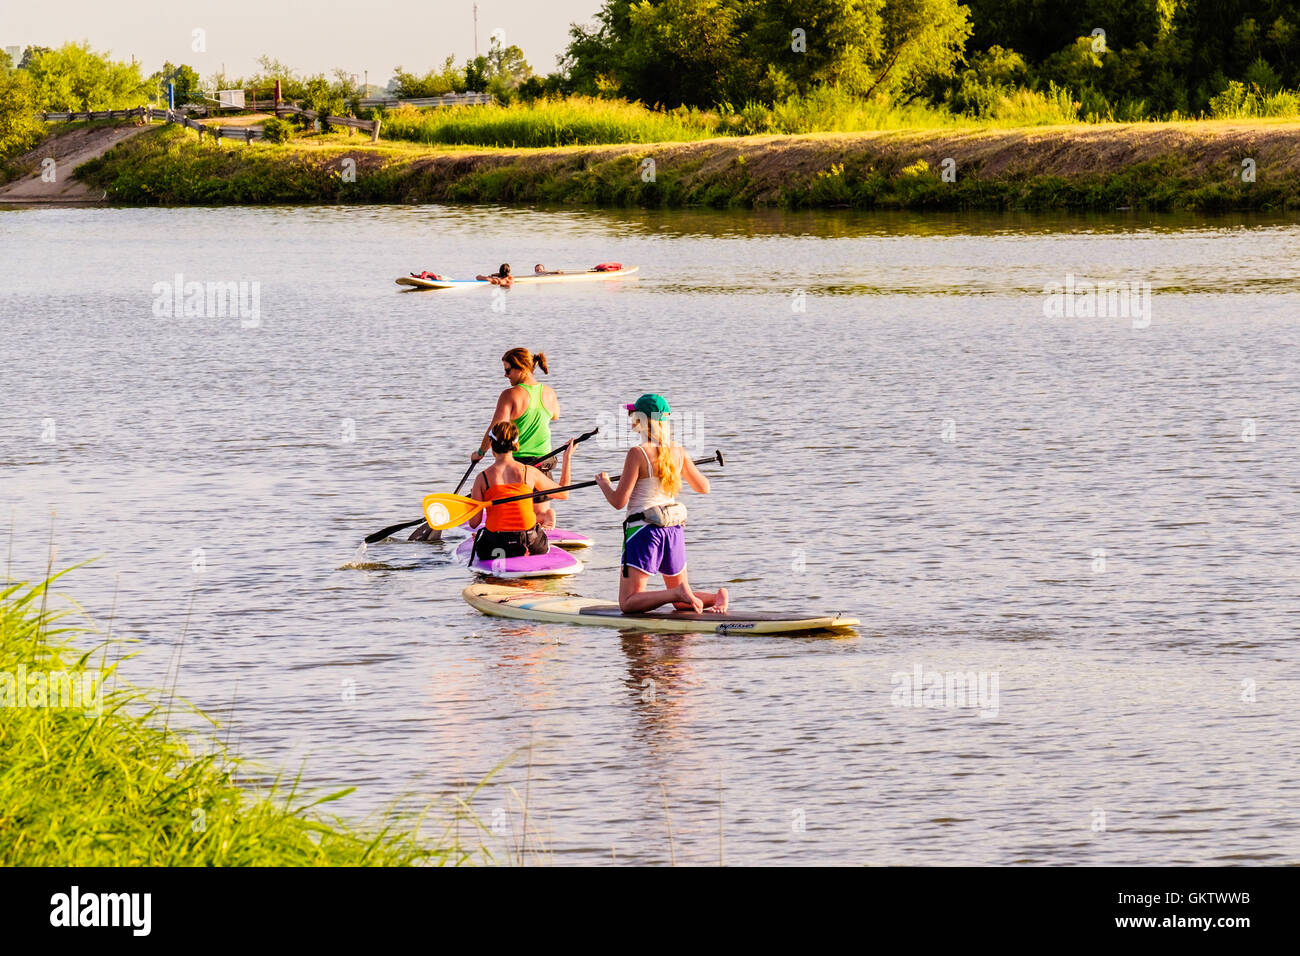 5 people enjoy paddleboarding on the North Canadian river next to Overholser lake in Oklahoma, USA. Stock Photo